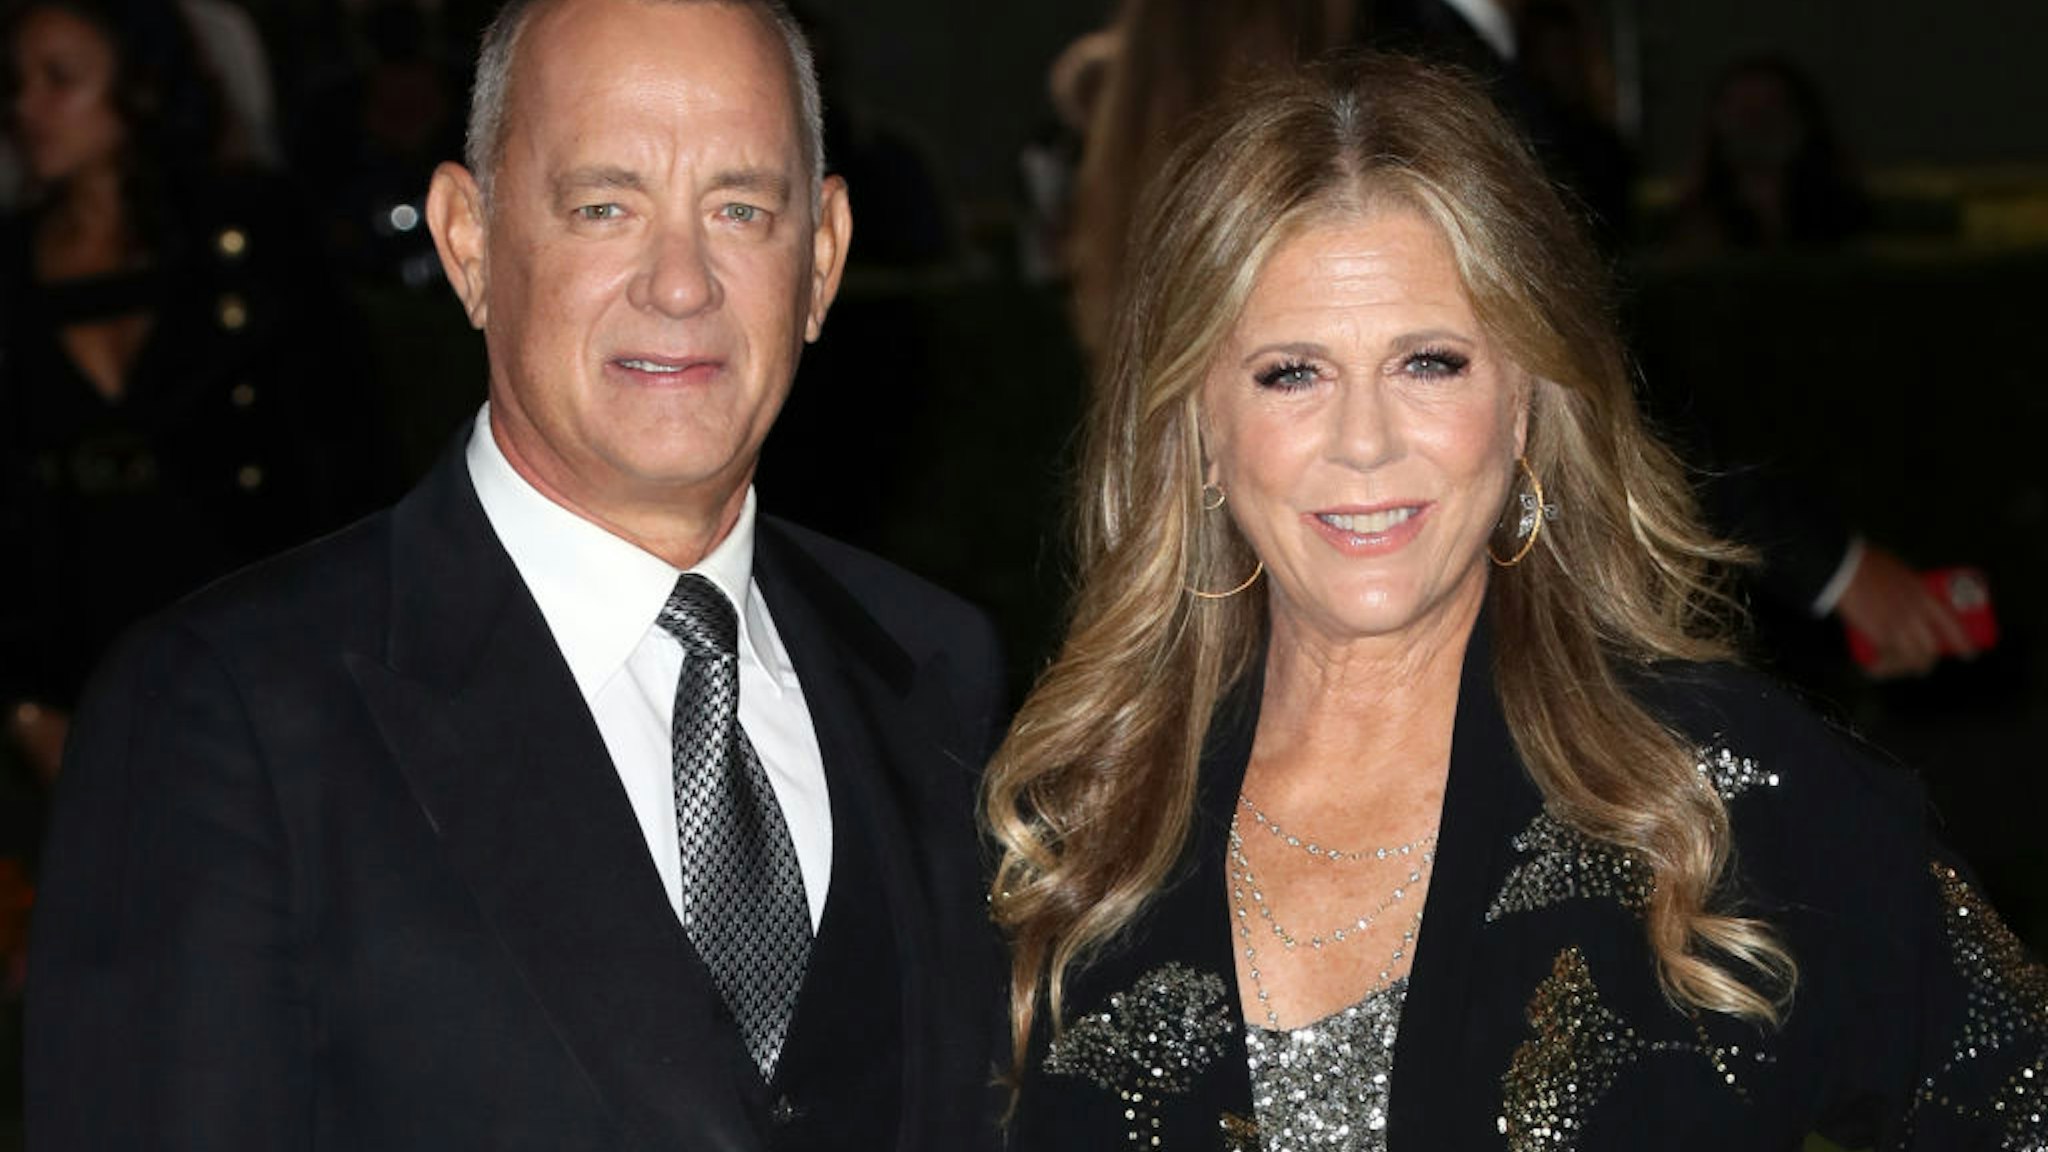 LOS ANGELES, CALIFORNIA - SEPTEMBER 25: Tom Hanks and Rita Wilson attend The Academy Museum of Motion Pictures Opening Gala at Academy Museum of Motion Pictures on September 25, 2021 in Los Angeles, California. (Photo by David Livingston/Getty Images for Fashion Media)